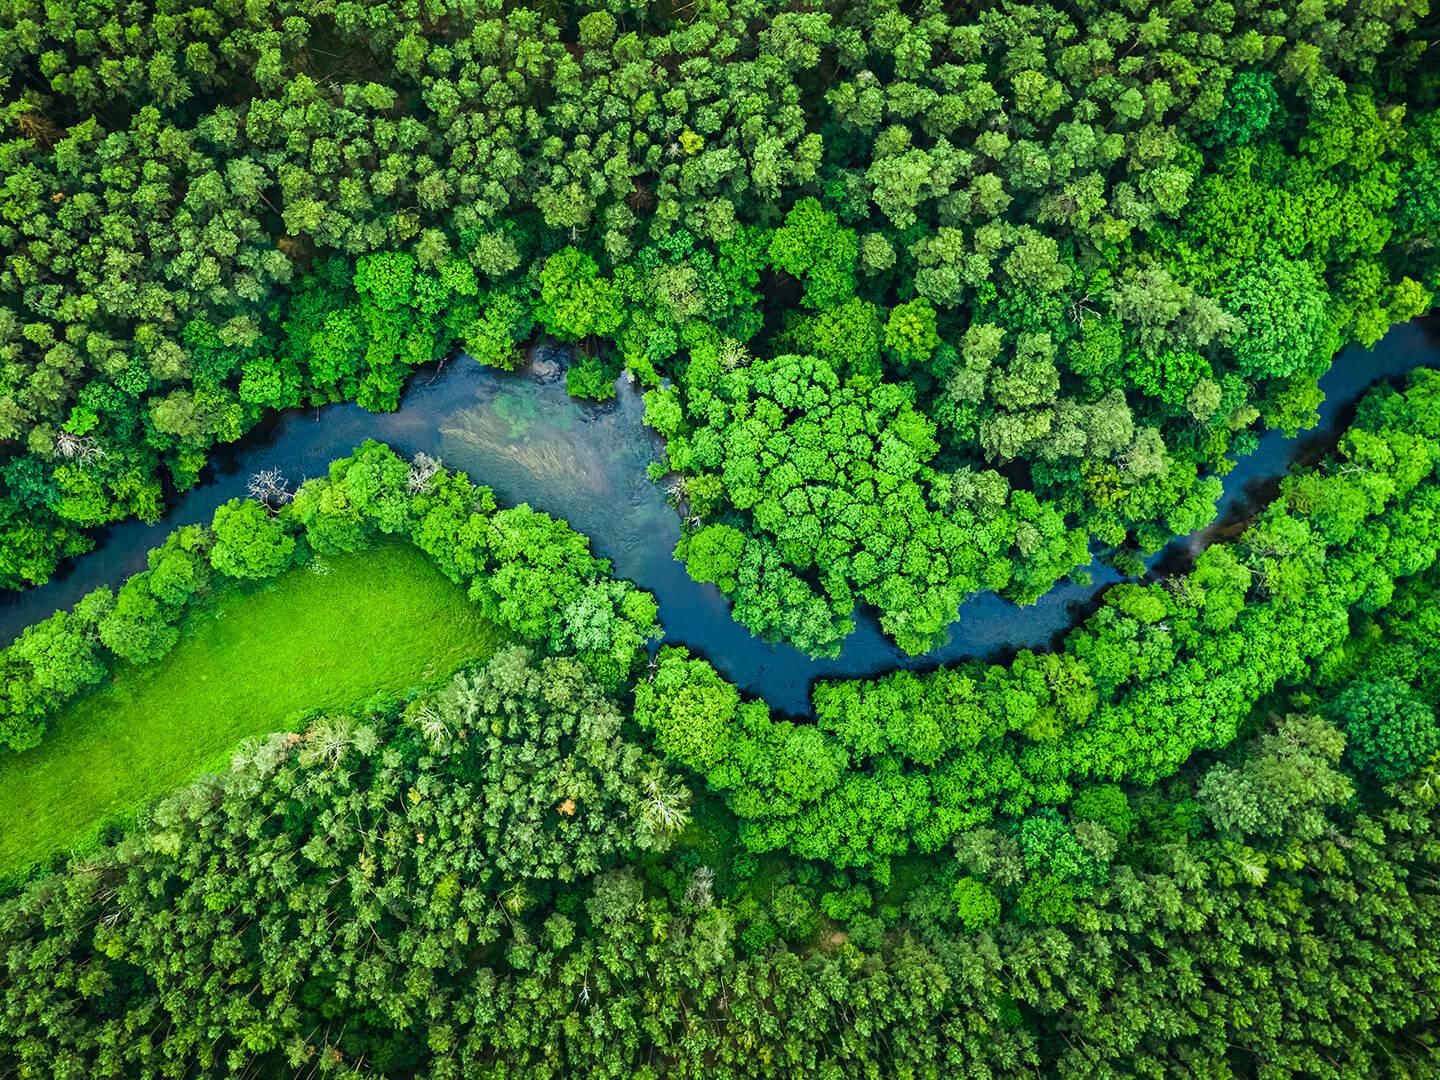 Rriver meanders through green forest